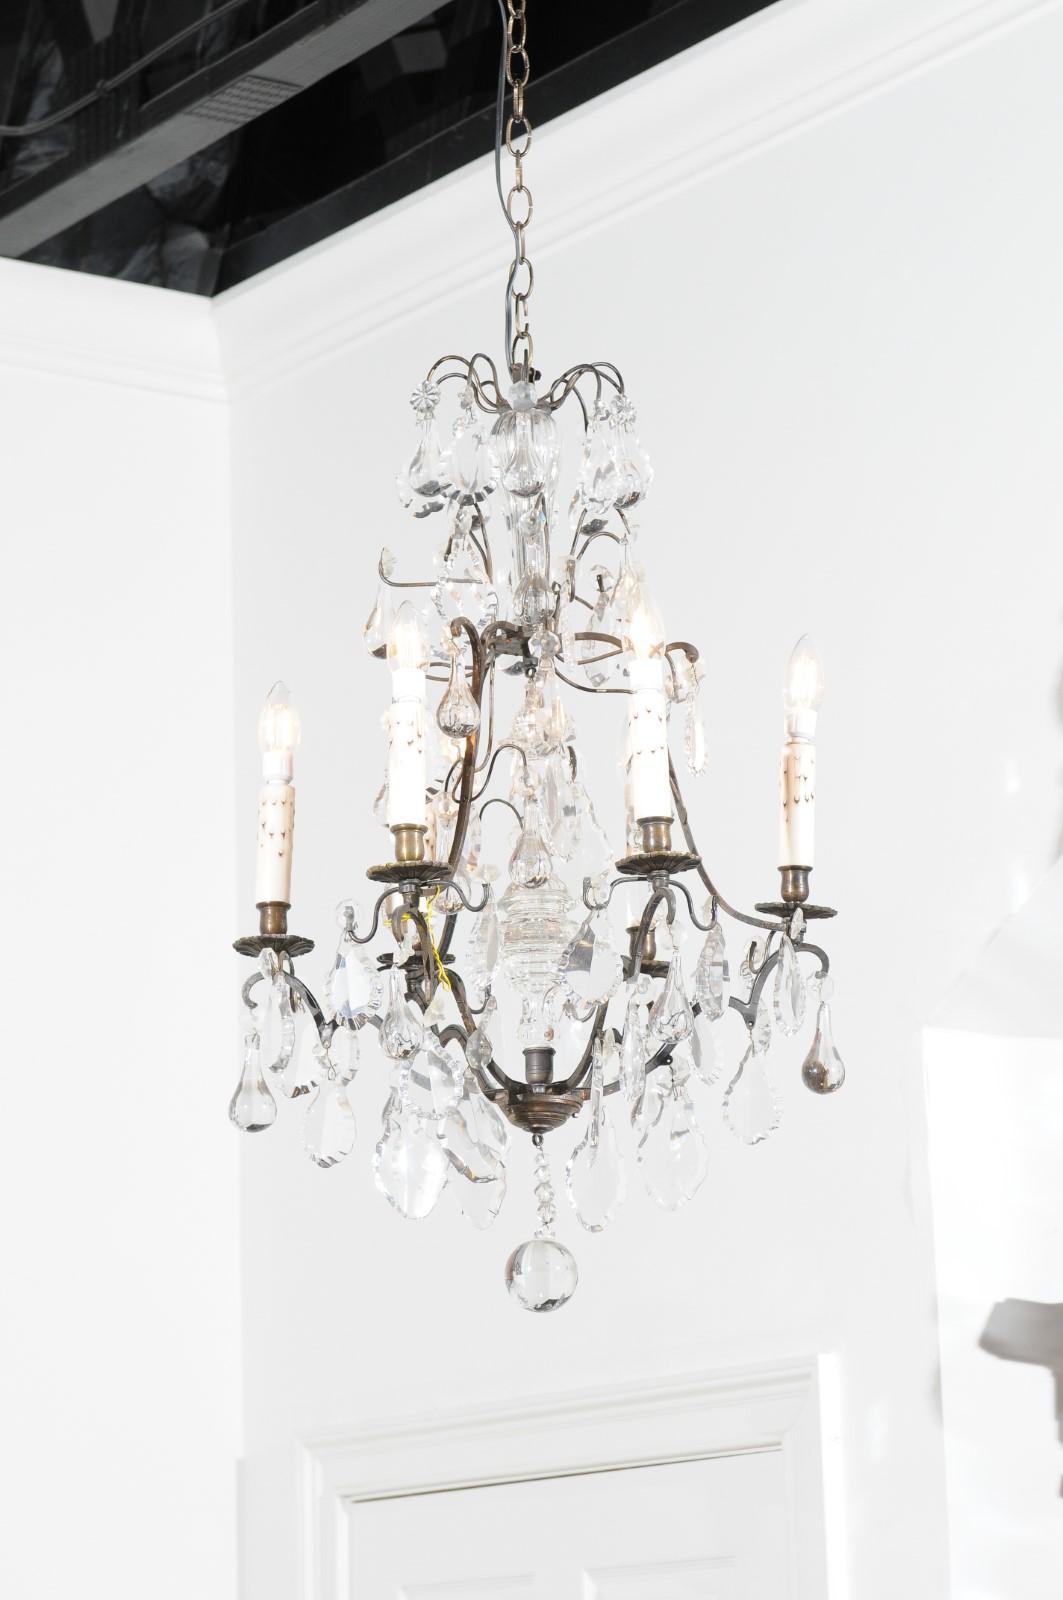 A French six-light crystal chandelier from the 19th century, with patinated brass structure, pendeloques and teardrops. Created in France during the 19th century, this crystal chandelier features an aged darkened brass armature connected to elegant